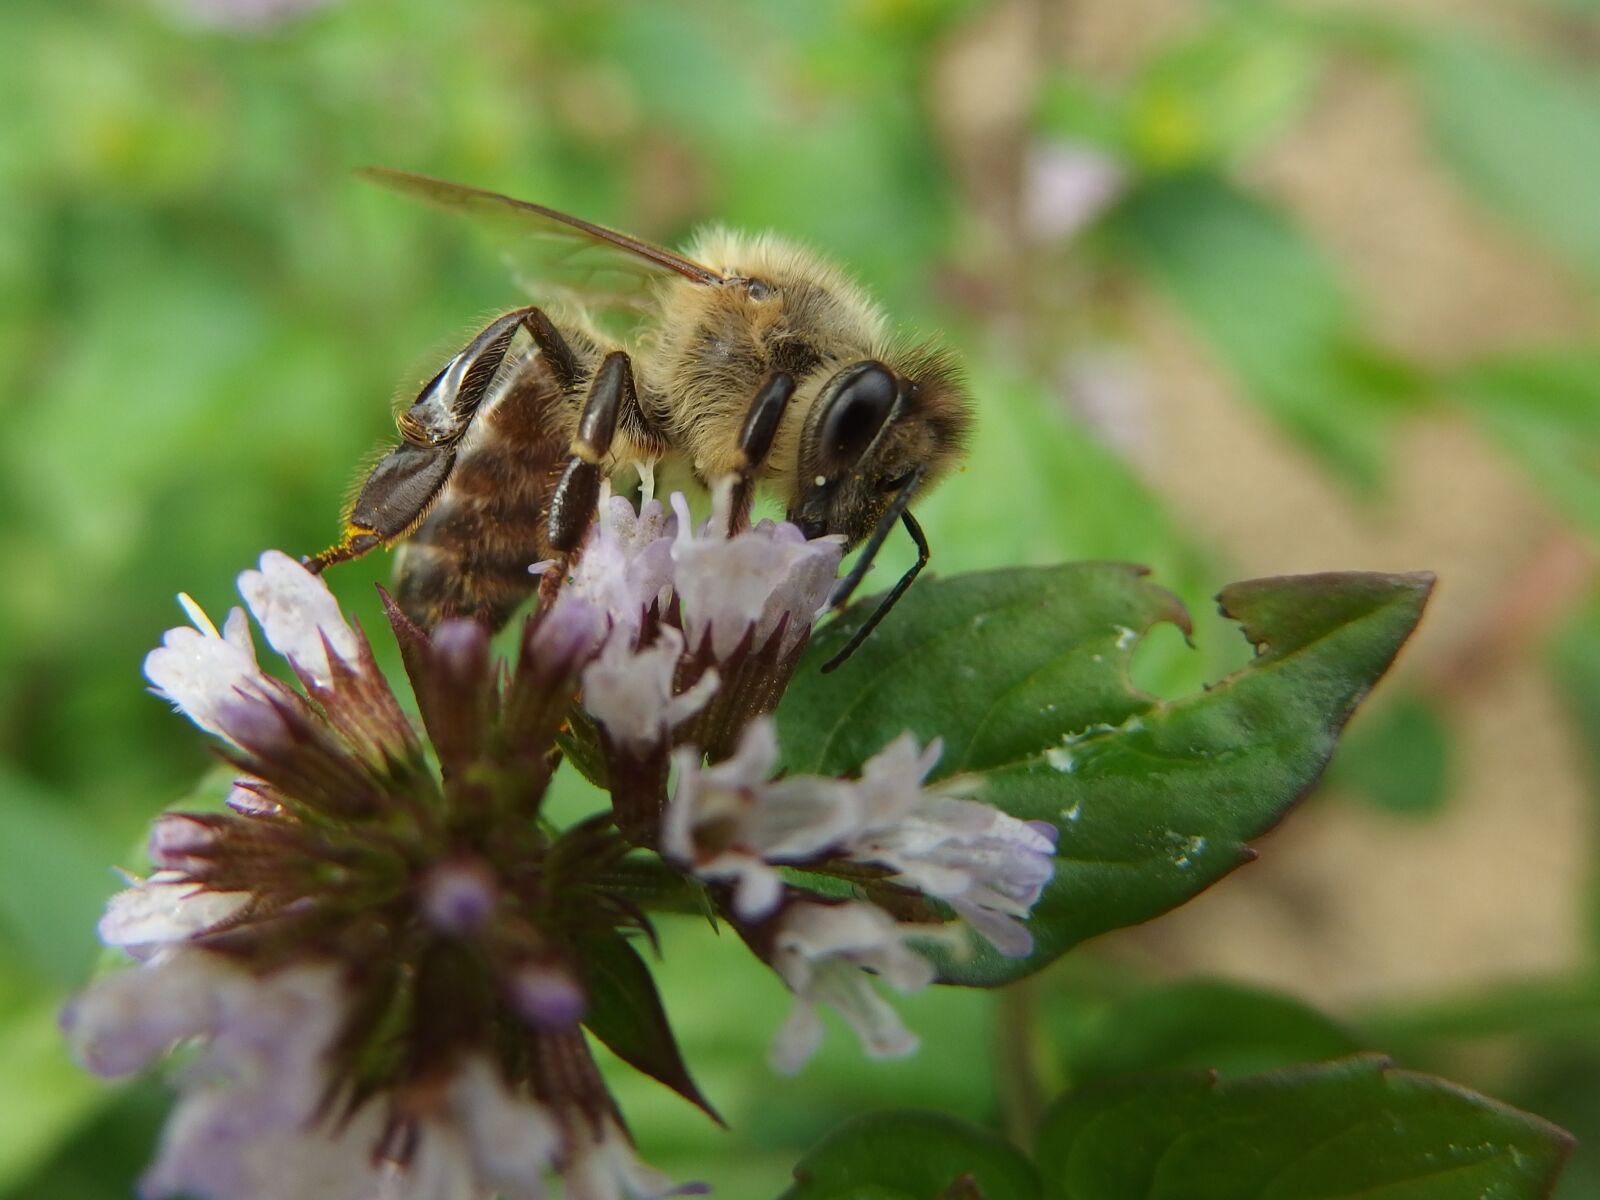 Olympus Stylus XZ-10 sample photo. Bee, mint, insect photography